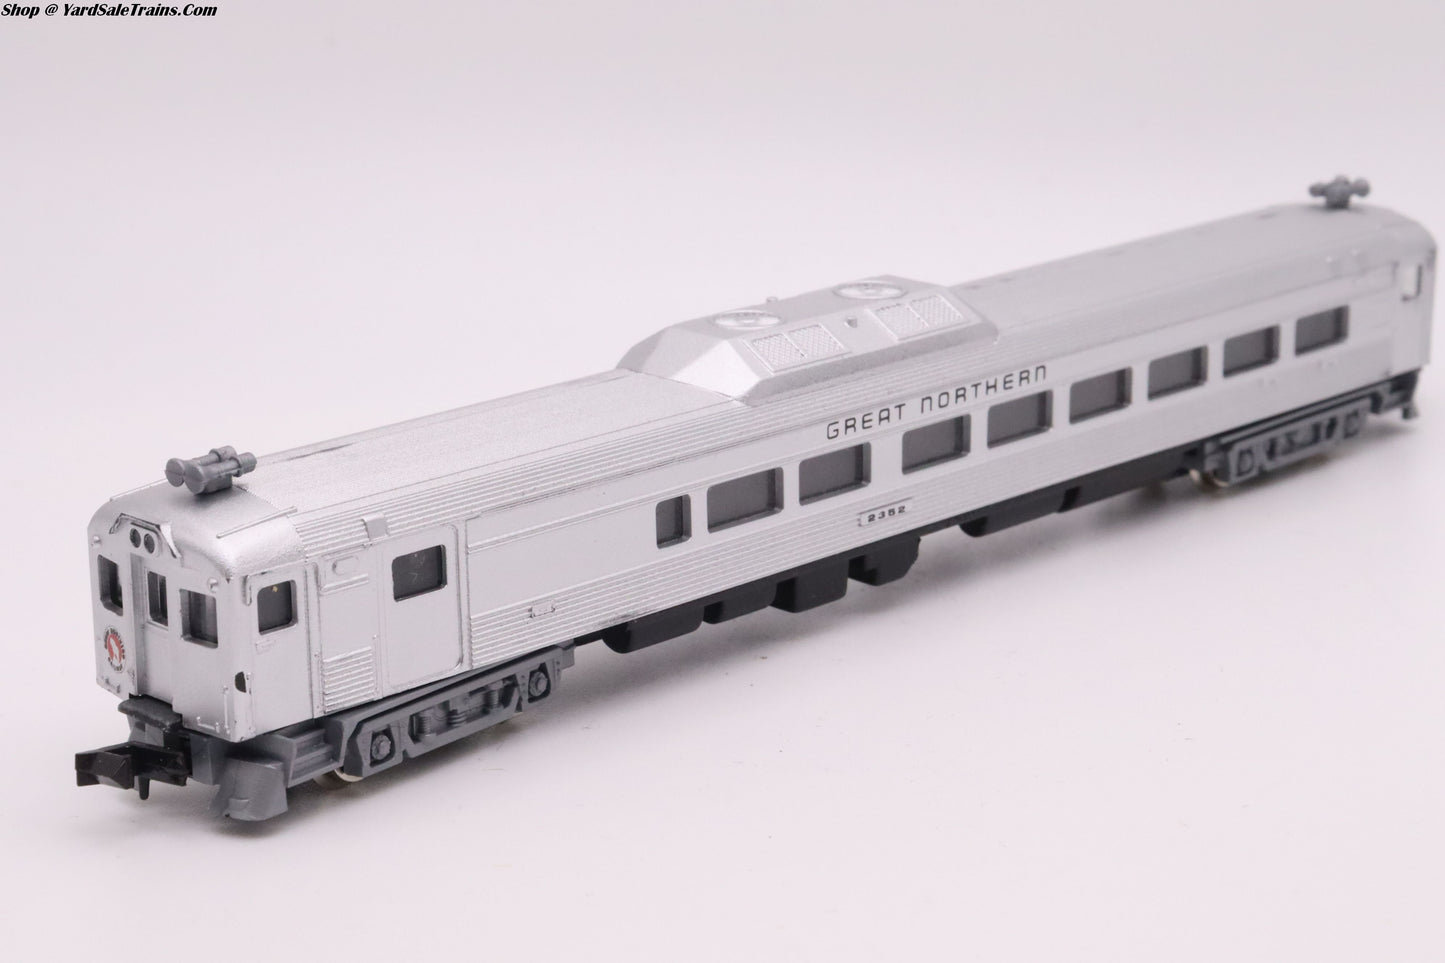 CC-1-004486 - RDC-2 Powered - Great Northern - GN #2352 - N Scale - Preowned